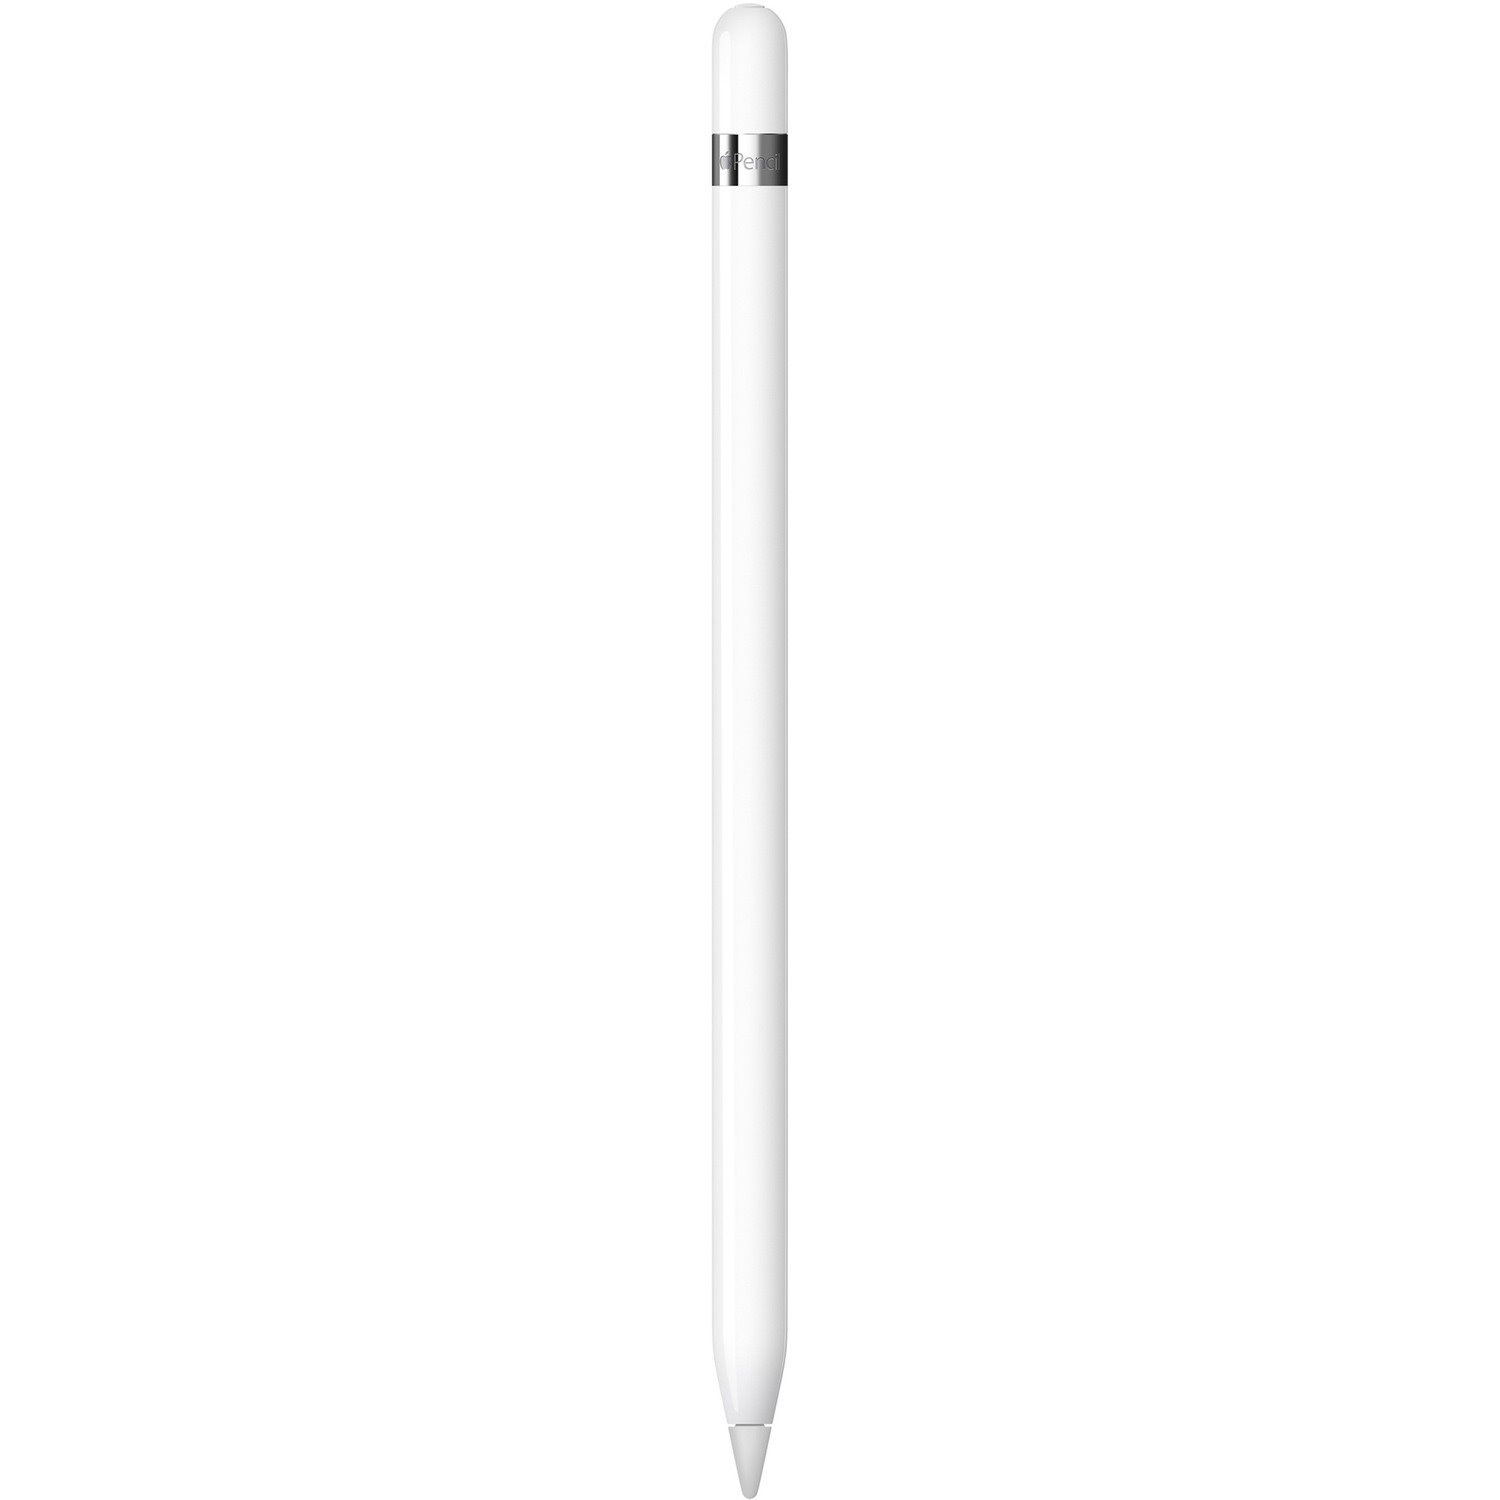 APPLE PENCIL (1ST GENERATION) FOR IPAD (8TH/7TH/6TH GEN) / IPAD AIR (3RD GEN) / IPAD MINI (5TH GEN) / IPAD PRO 9.7IN (EOL) / IPAD PRO 10.5IN (EOL) / 1ST & 2ND GEN IPAD PRO 12.9IN (EOL)